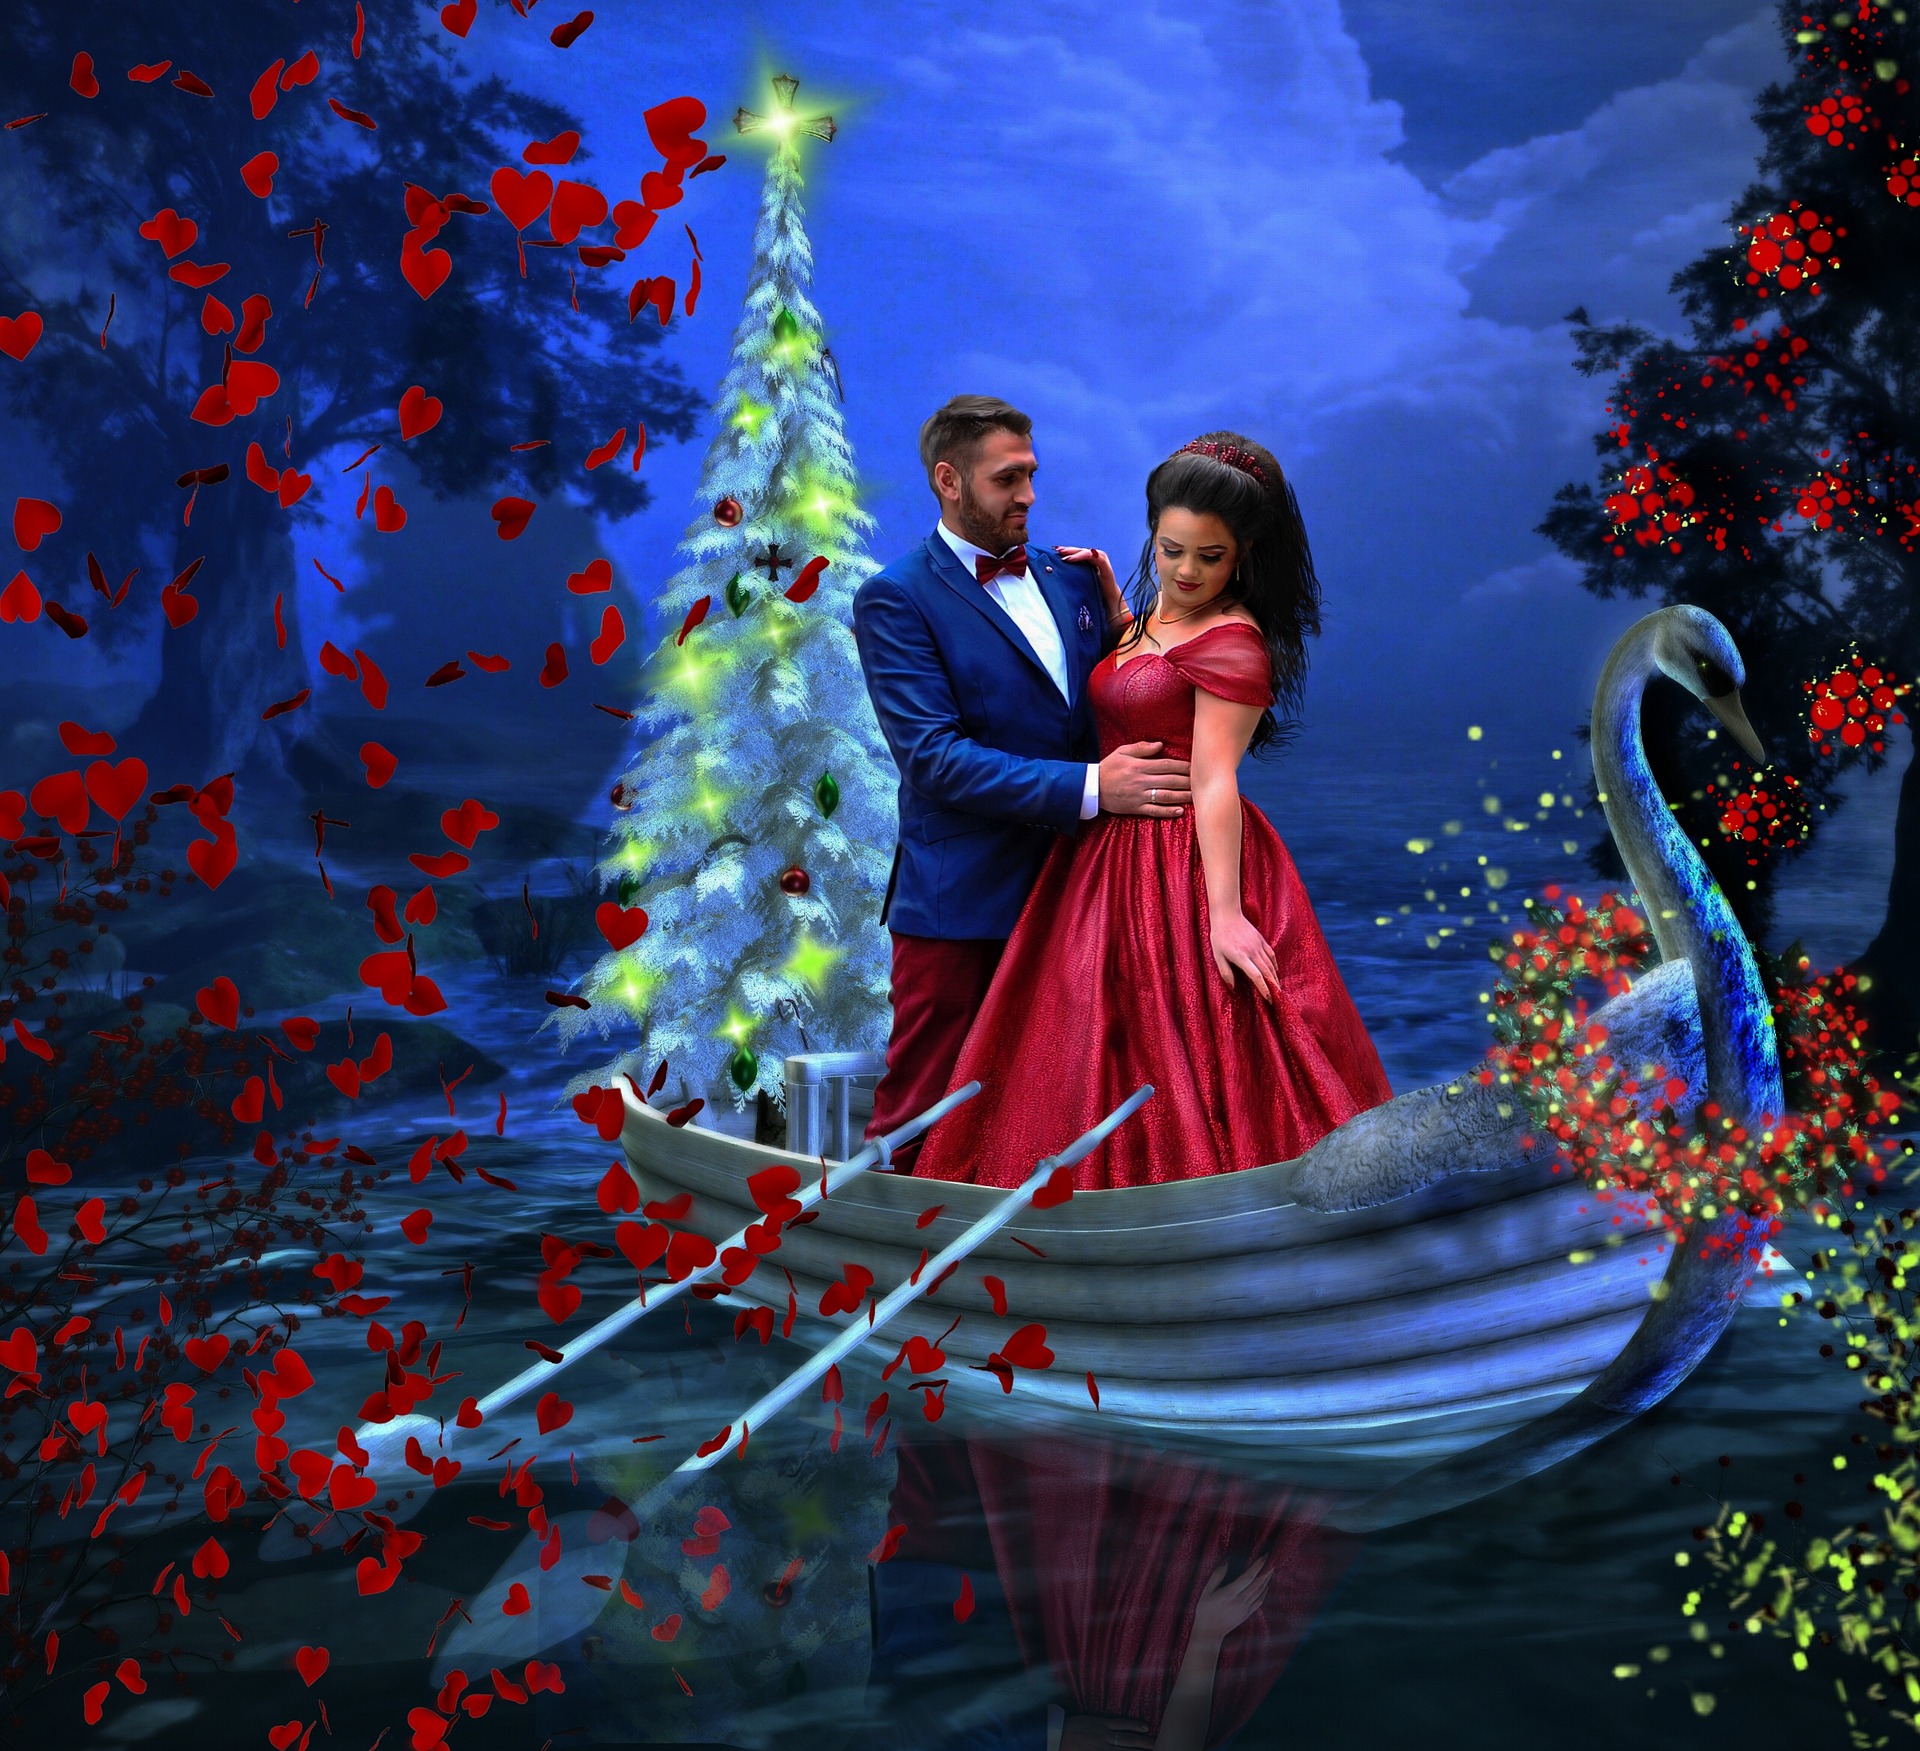 Couple on a boat under a Christmas Tree